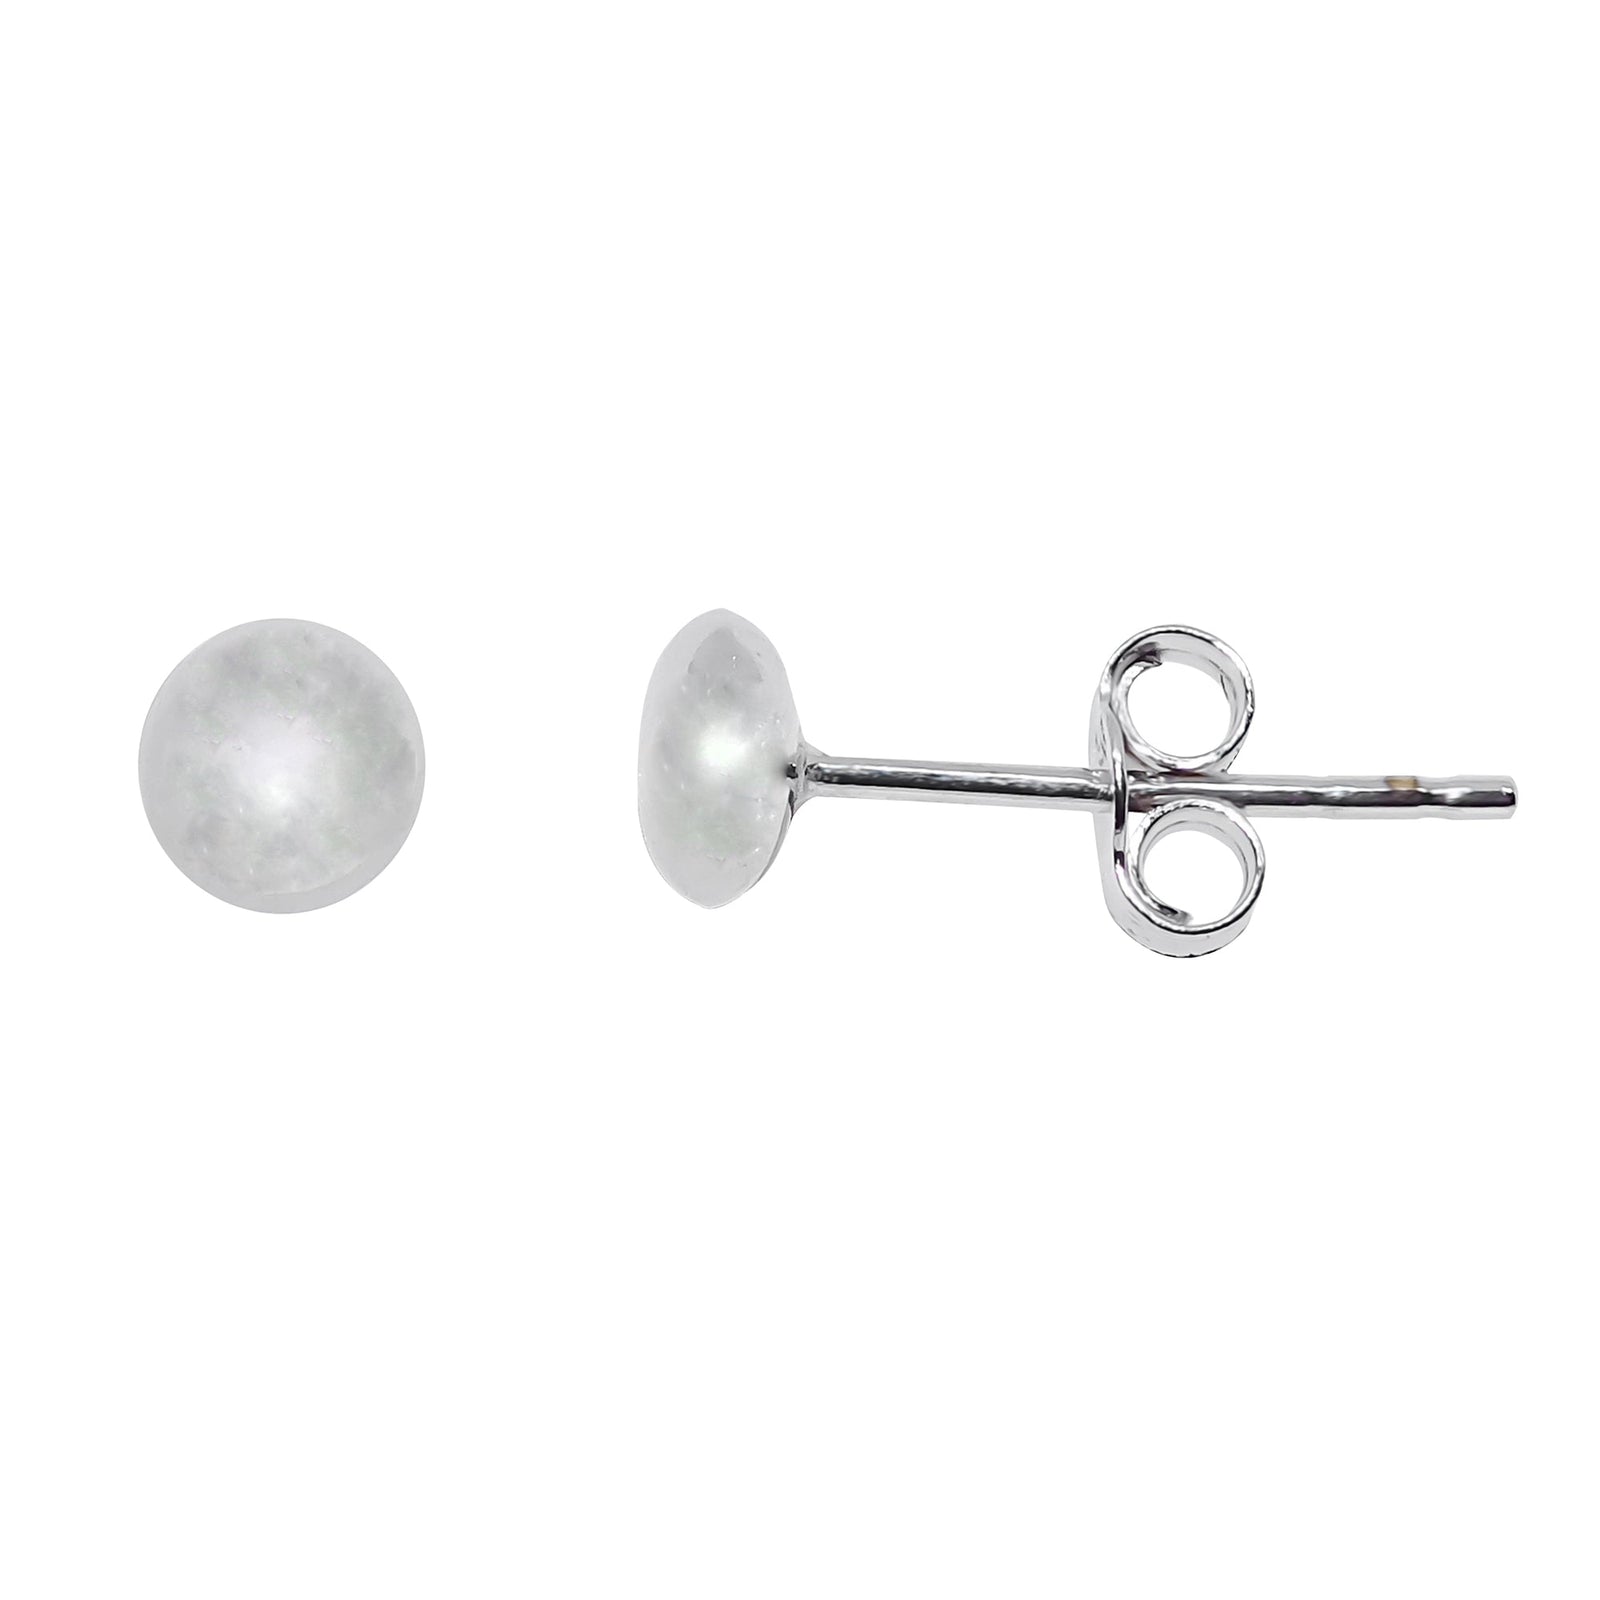 9ct white gold 4mm bouton stud earrings